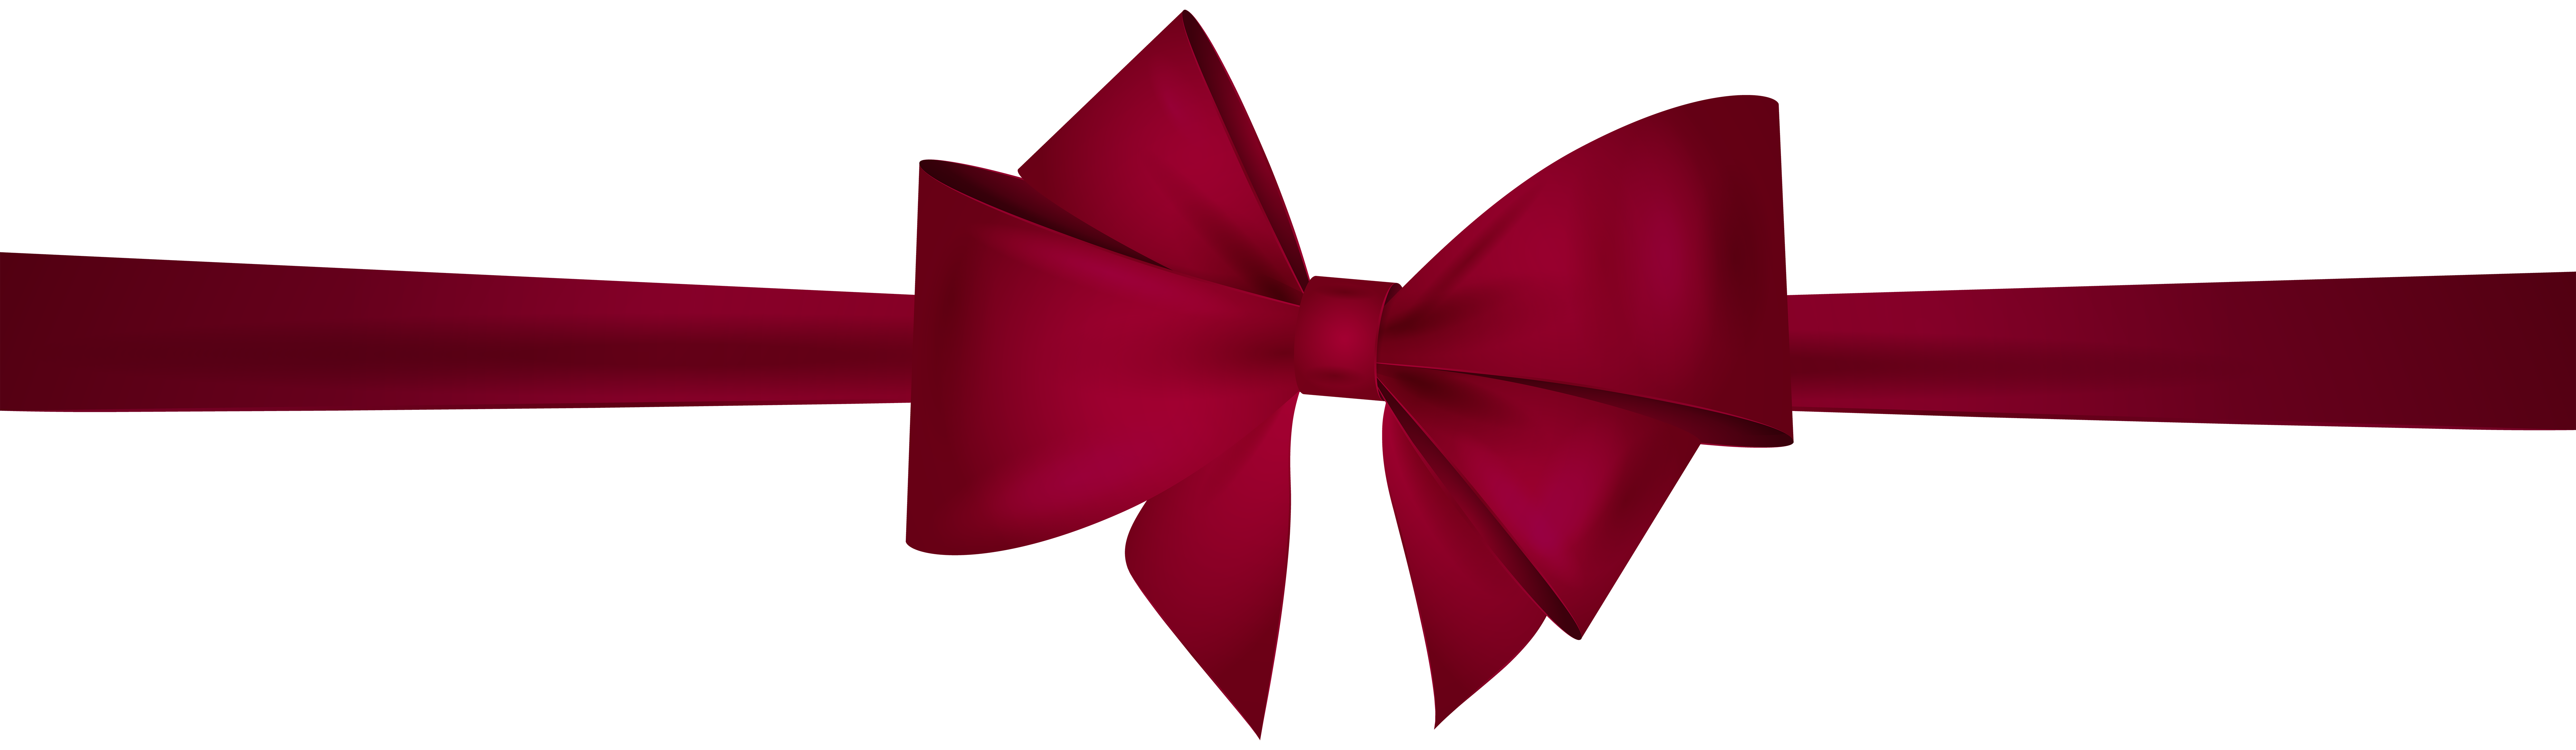 Clipart bow banner. Red png clip art